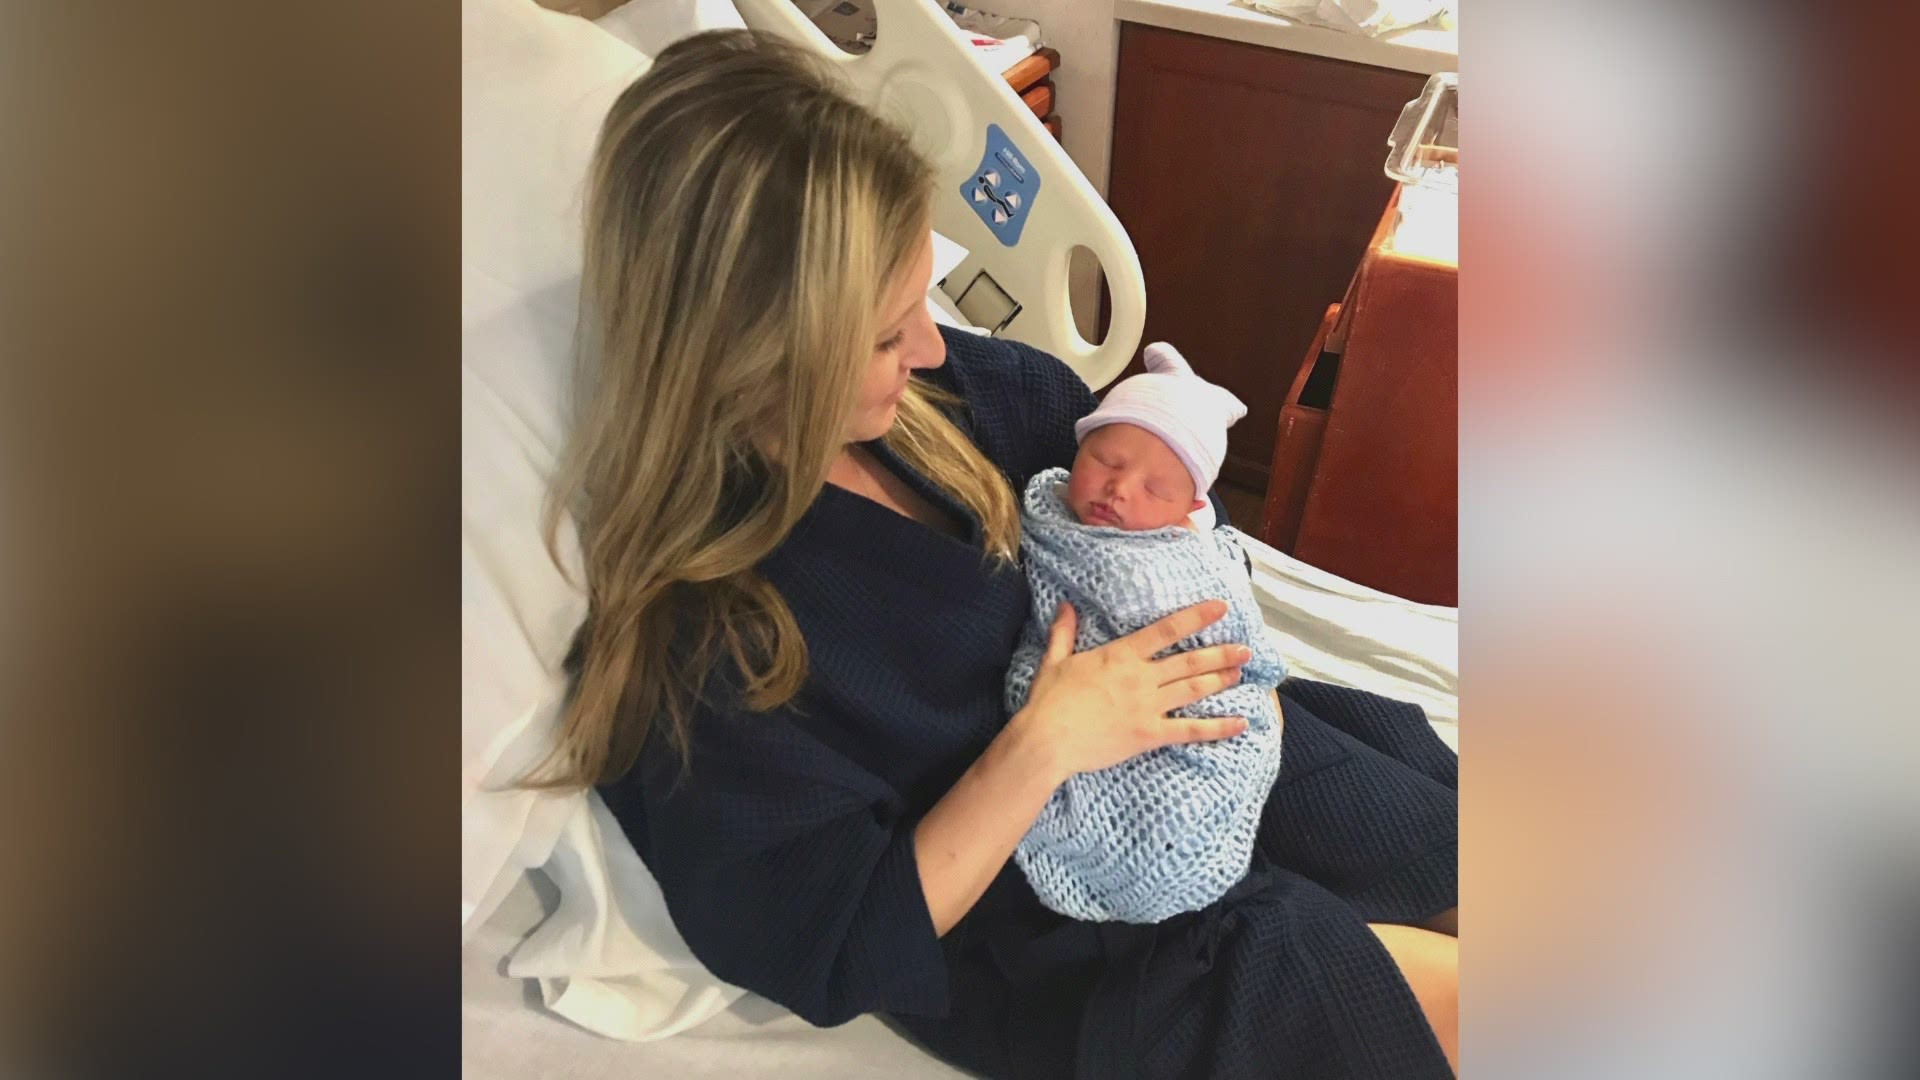 You may have noticed our own Jenn Bernstein has not been joining us on the news each night and that’s because Jenn just had a baby.